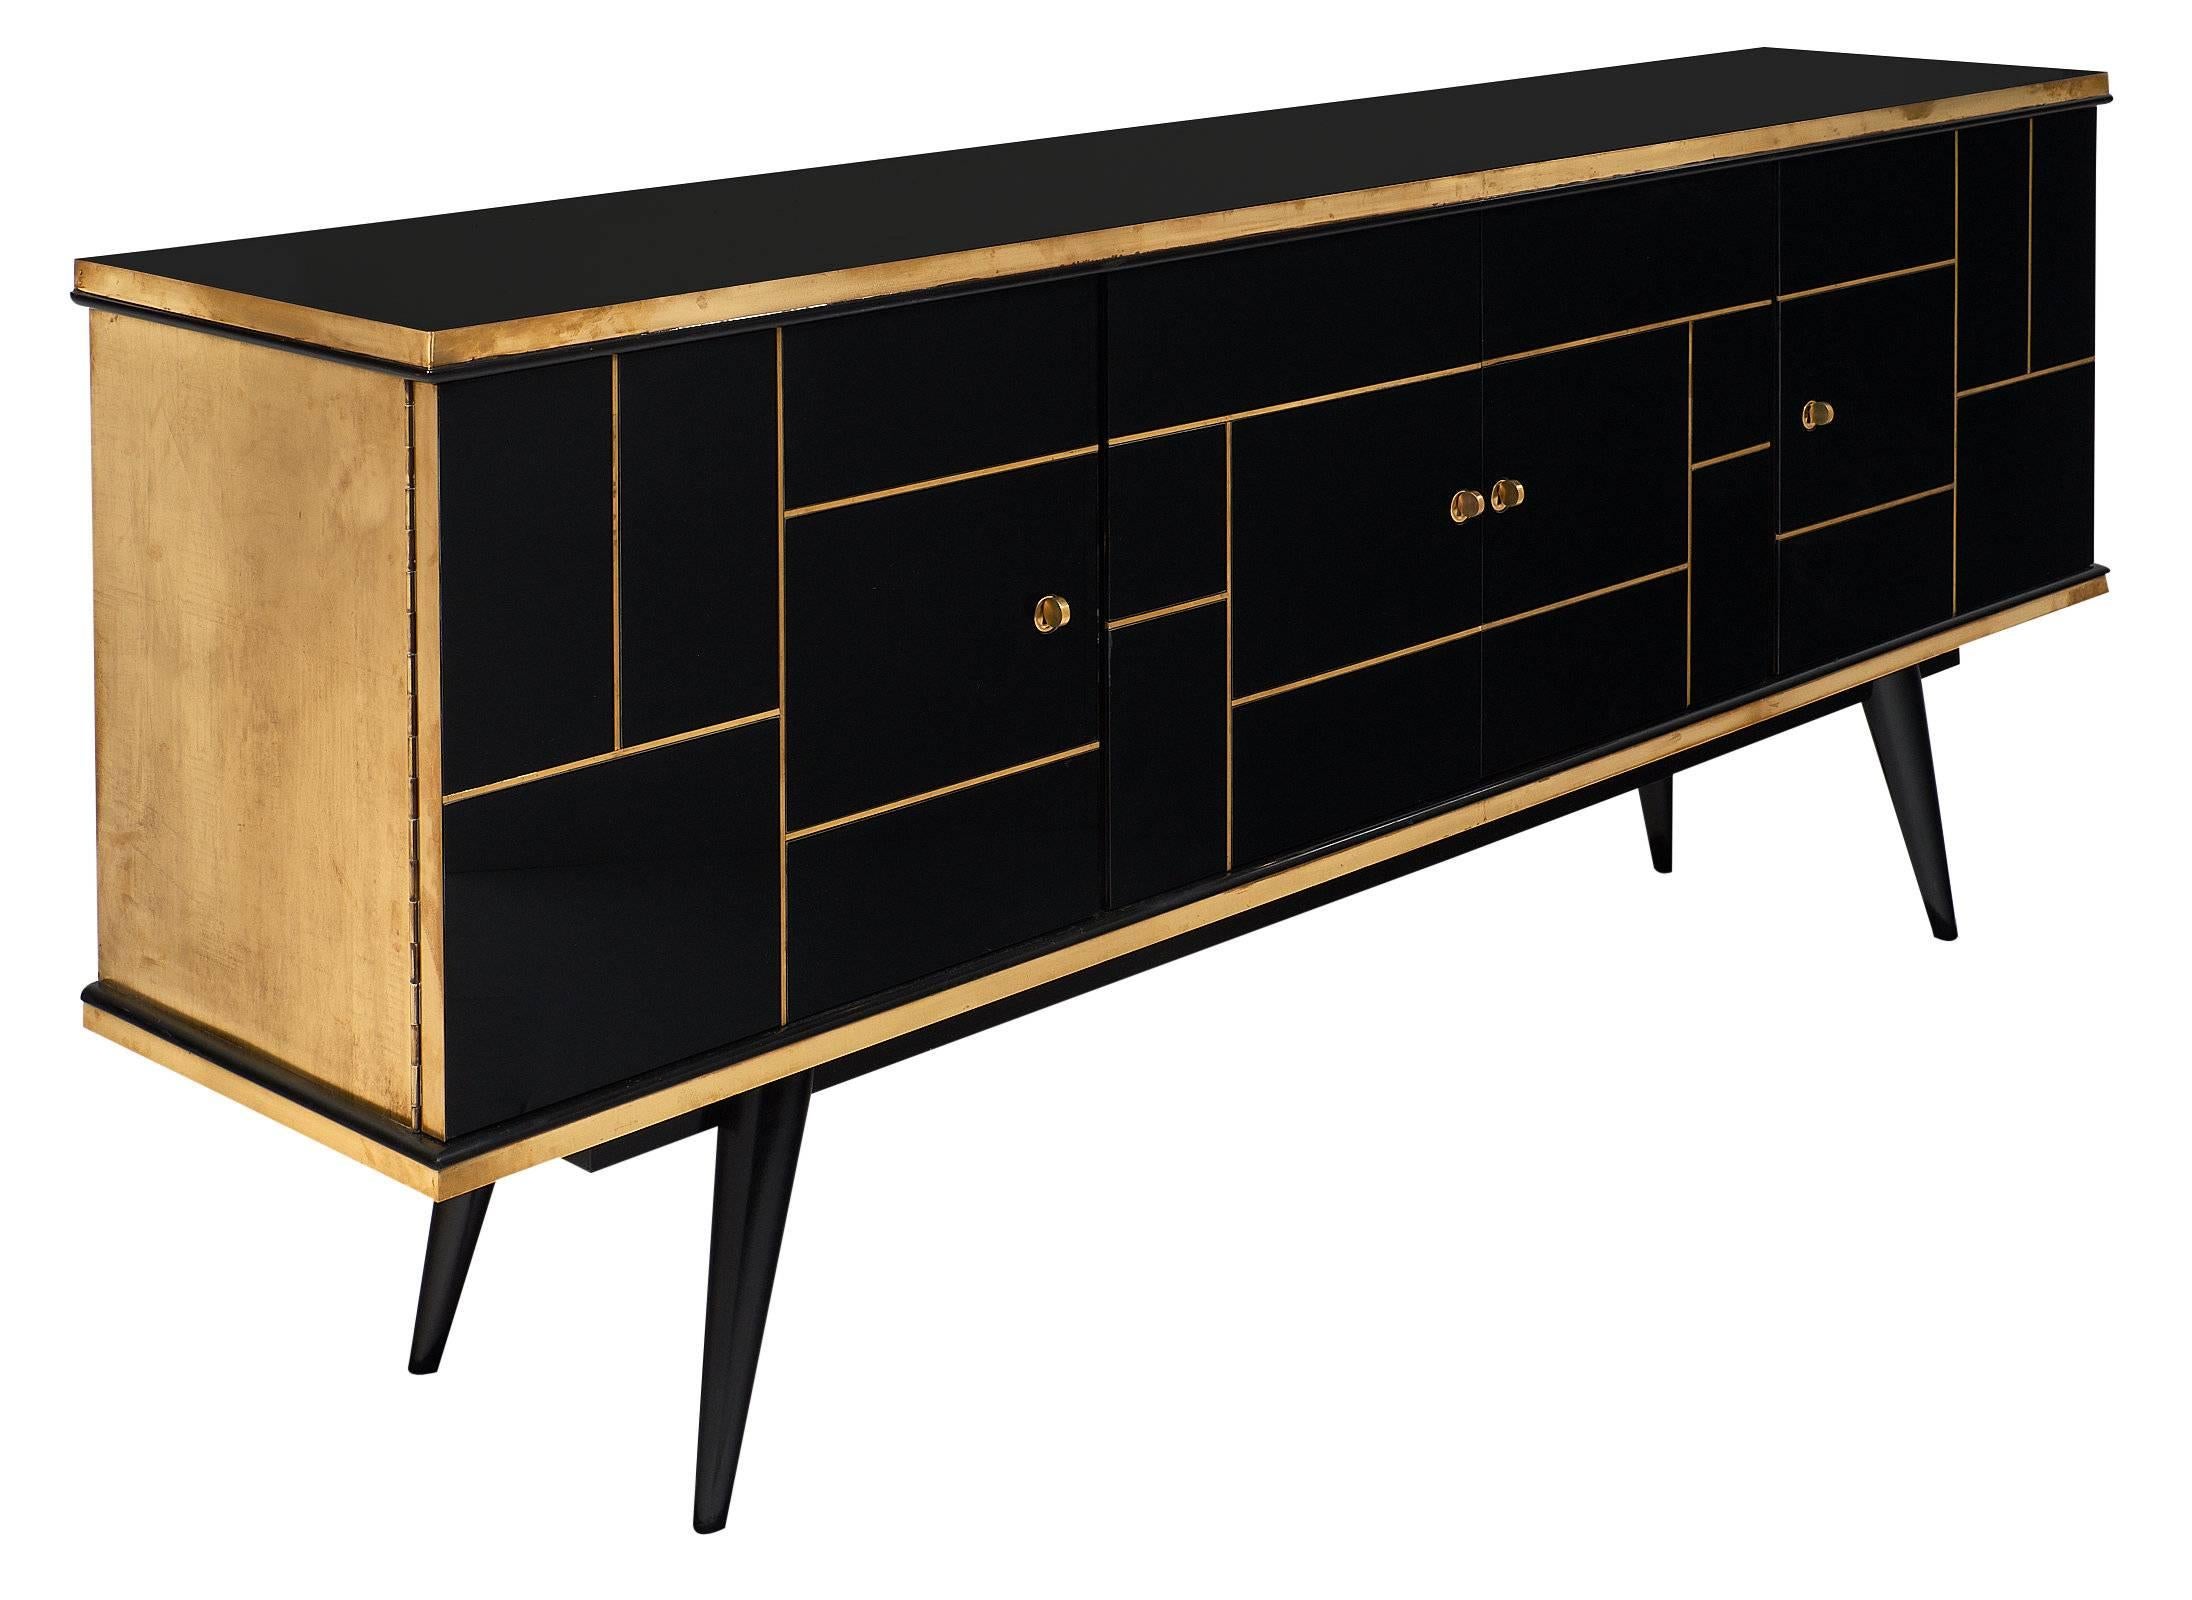 A fine French Modernist credenza customized with black glass panels trimmed in brass on its facade. The piece has full brass side panels and trims. Four doors open to a pristine satin wood interior. Four tapered legs flare out to support the buffet.